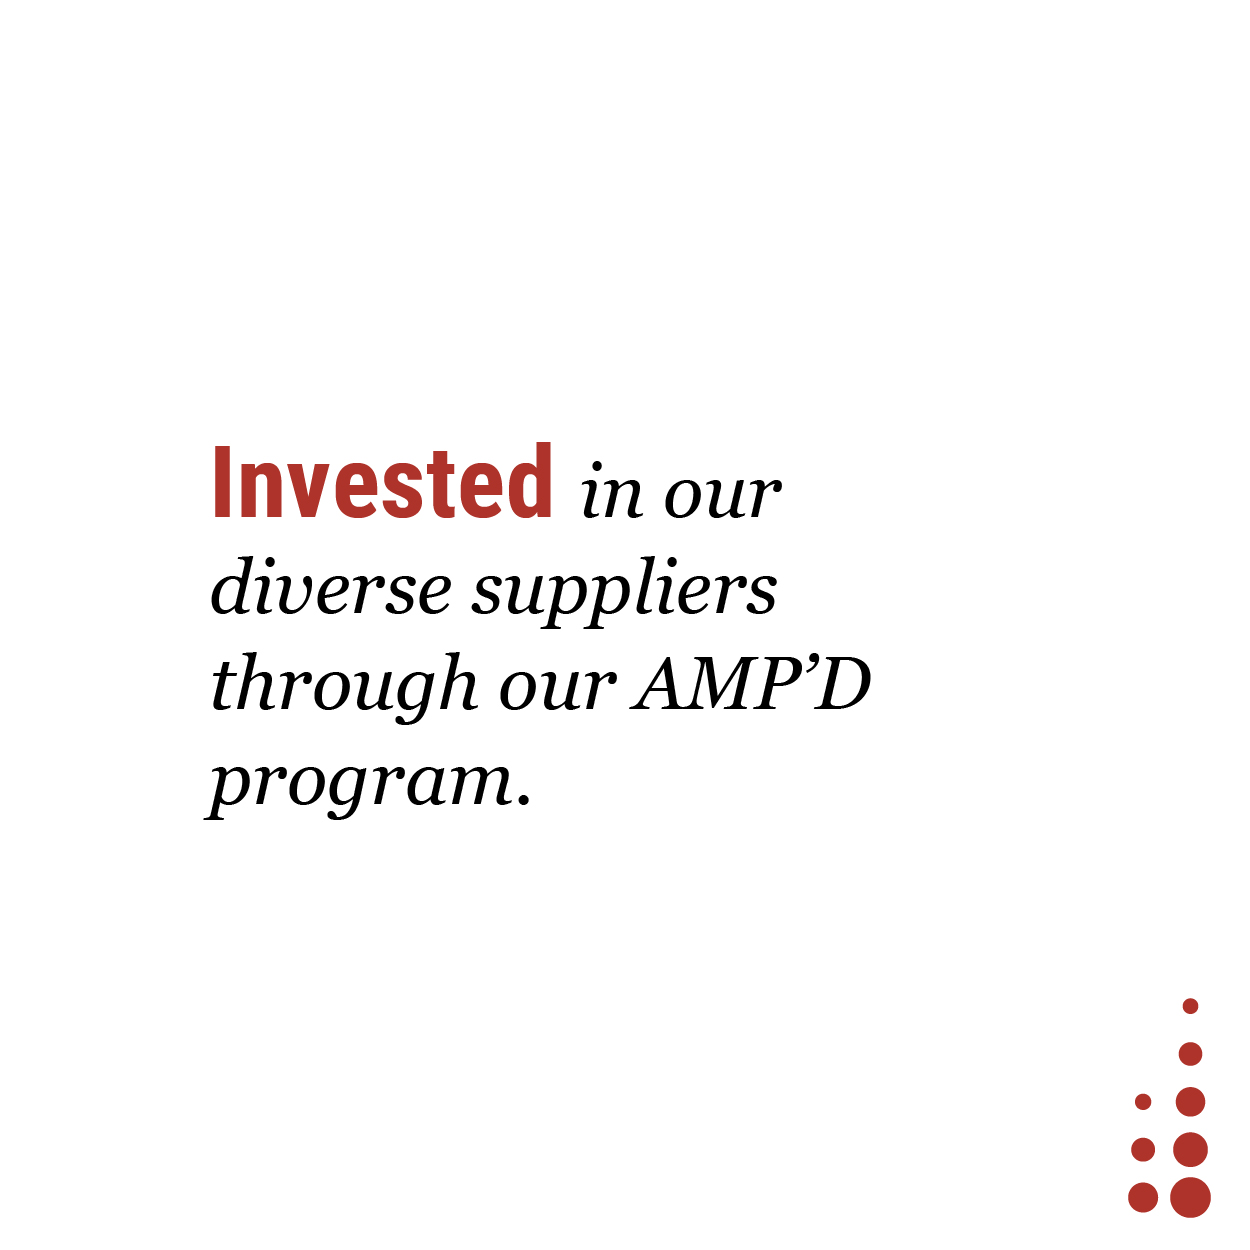 Invested in our diverse suppliers through our AMP’D program.